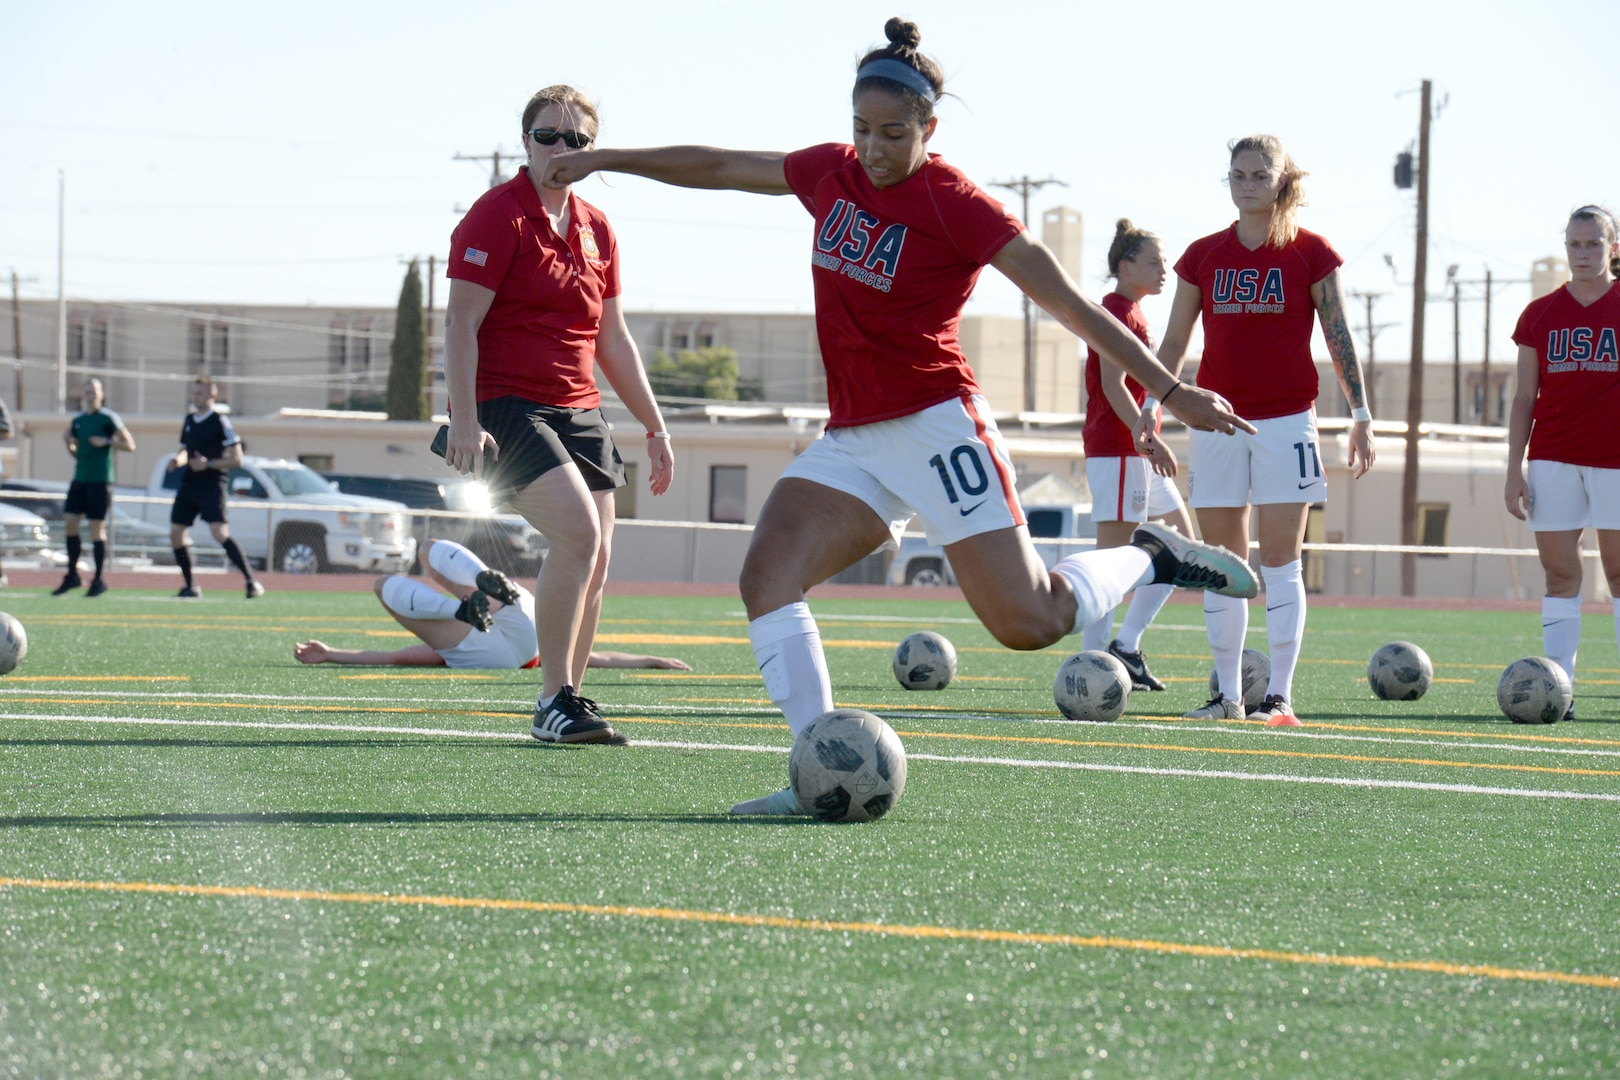 2018 Conseil International du Sport Militaire (CISM) World Military Women’s Football Championship. International military teams squared off at Fort Bliss’ Stout Field June 22 - July 3, 2018